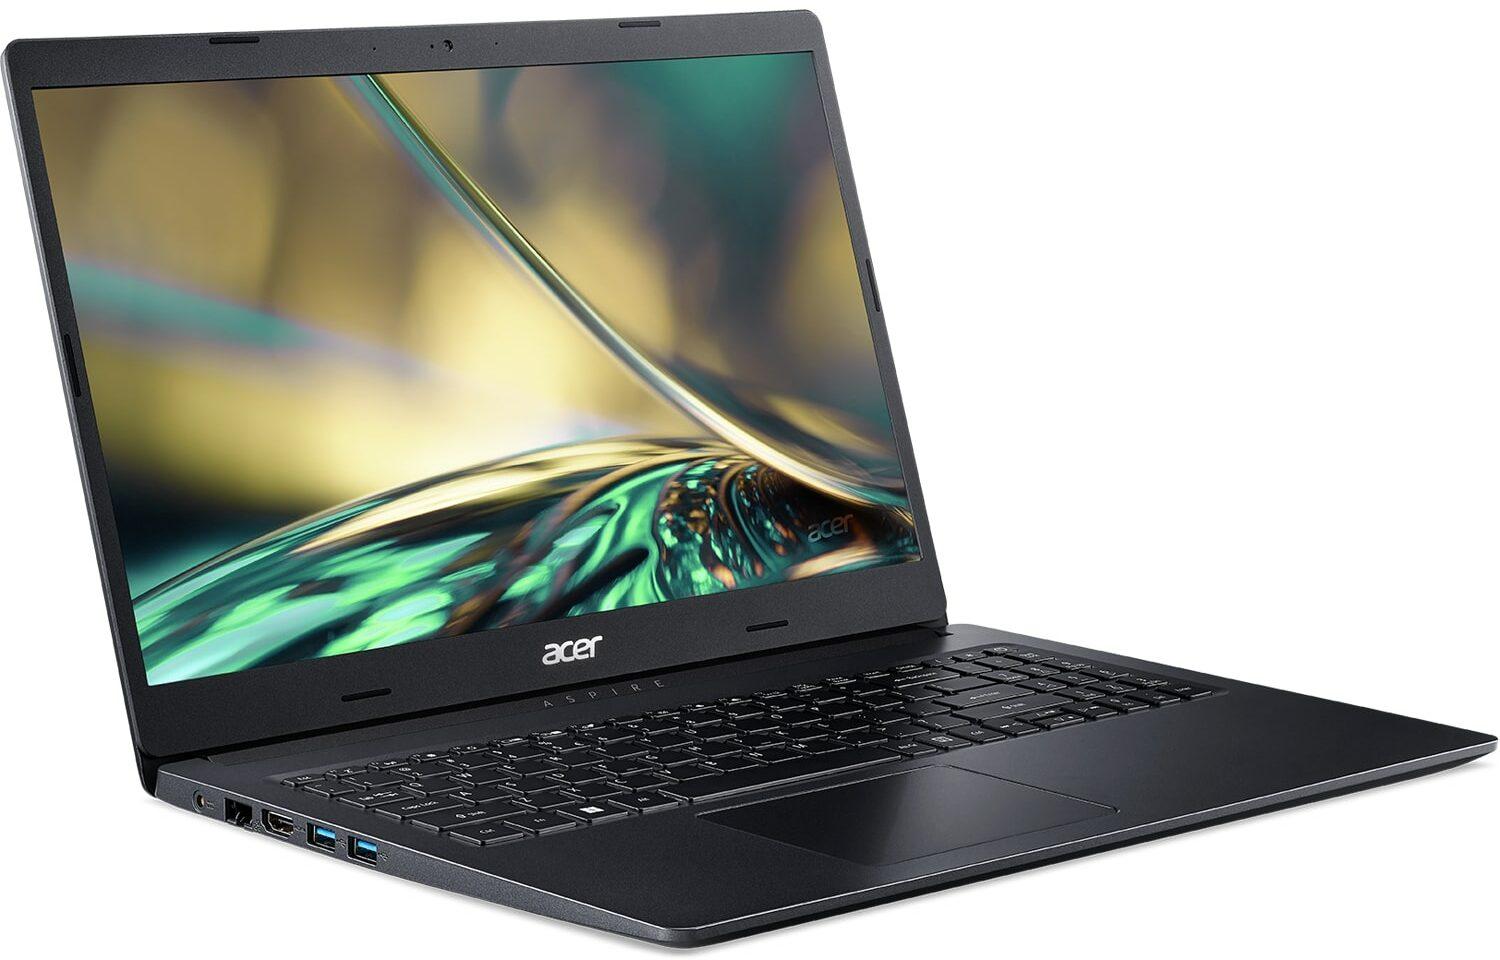 Selected image for ACER  Лаптоп  Aspire 3 (A315-43-R8VU), Black, 15.6" IPS FHD (1920 x 1080), AMD